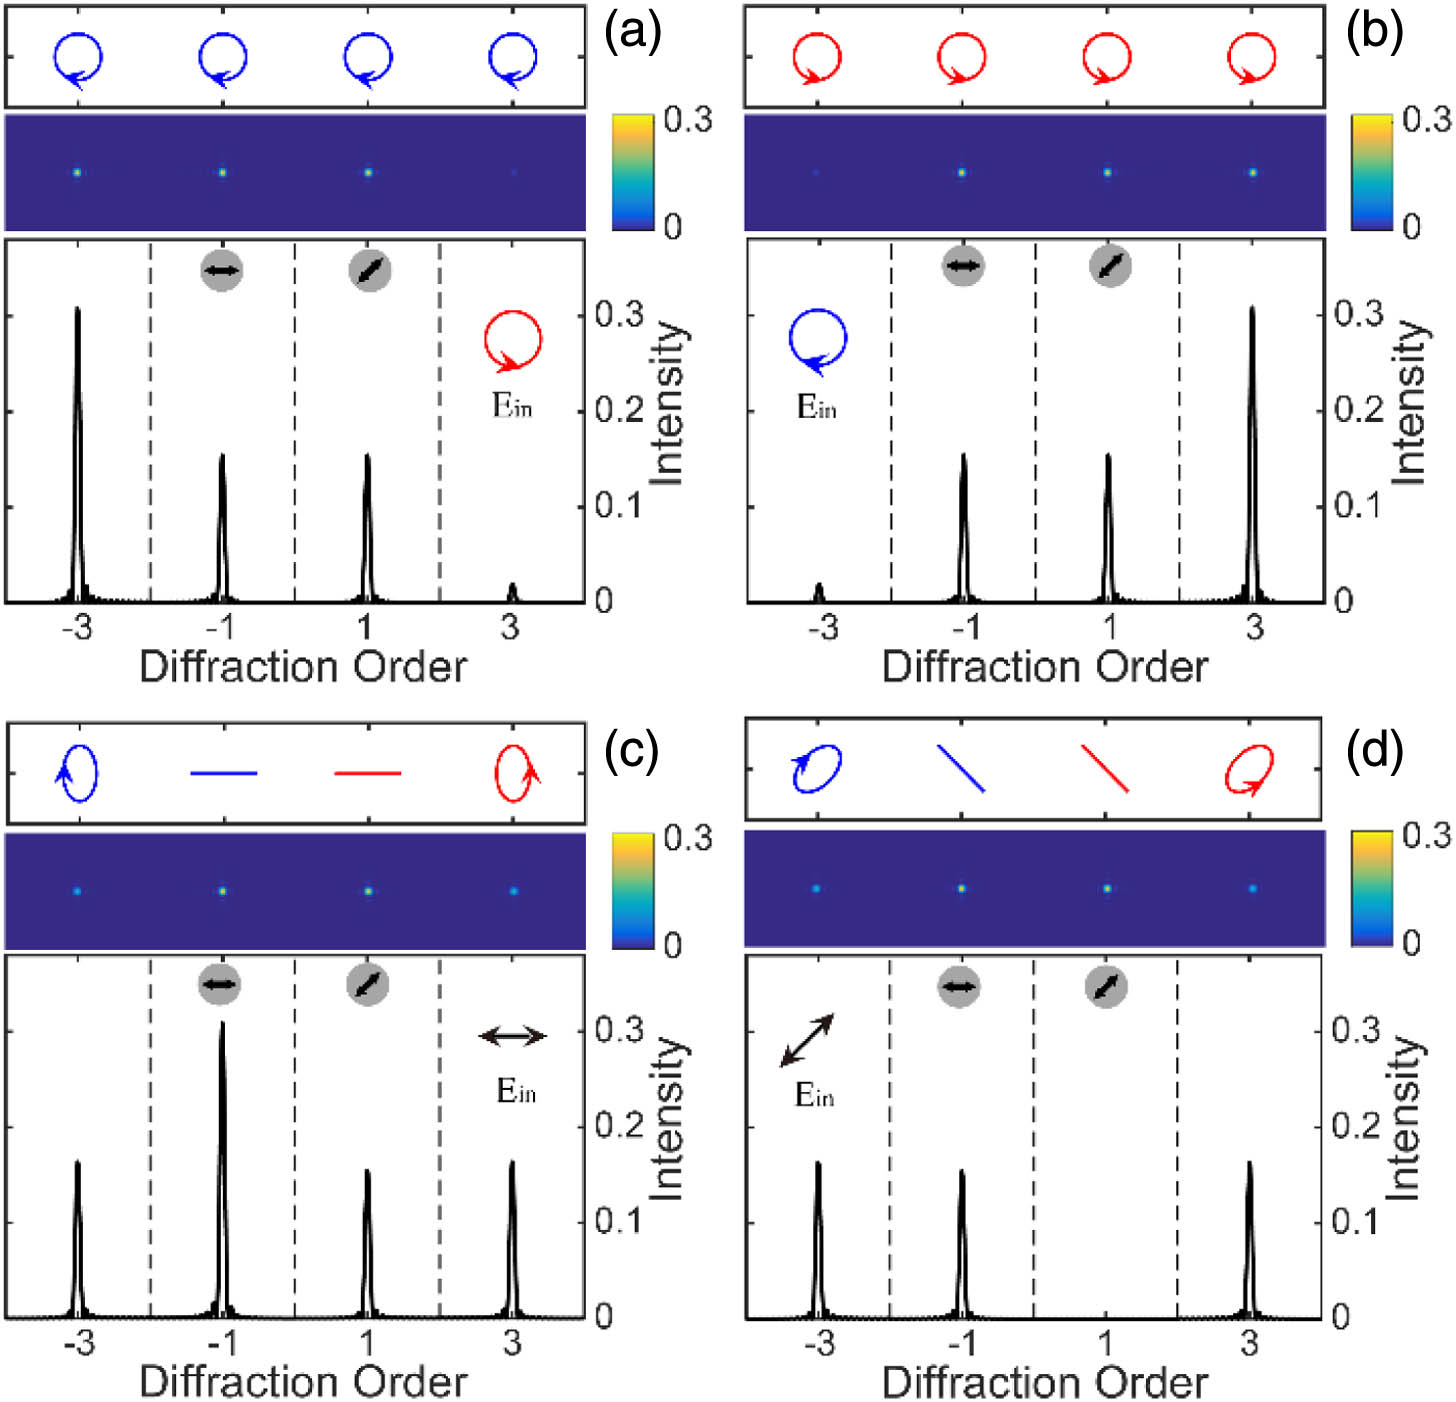 Calculated intensities and polarization states of the diffraction orders (±1, ±3) through GPOE for the incident light with (a) LCP, (b) RCP, (c) 0°, and (d) 45° LP, respectively. In each subfigure, polarization ellipses and intensities are shown in top and middle panels, while the bottom panels show intensities through 0° and 45° polarizers indicated by gray circles and arrows.